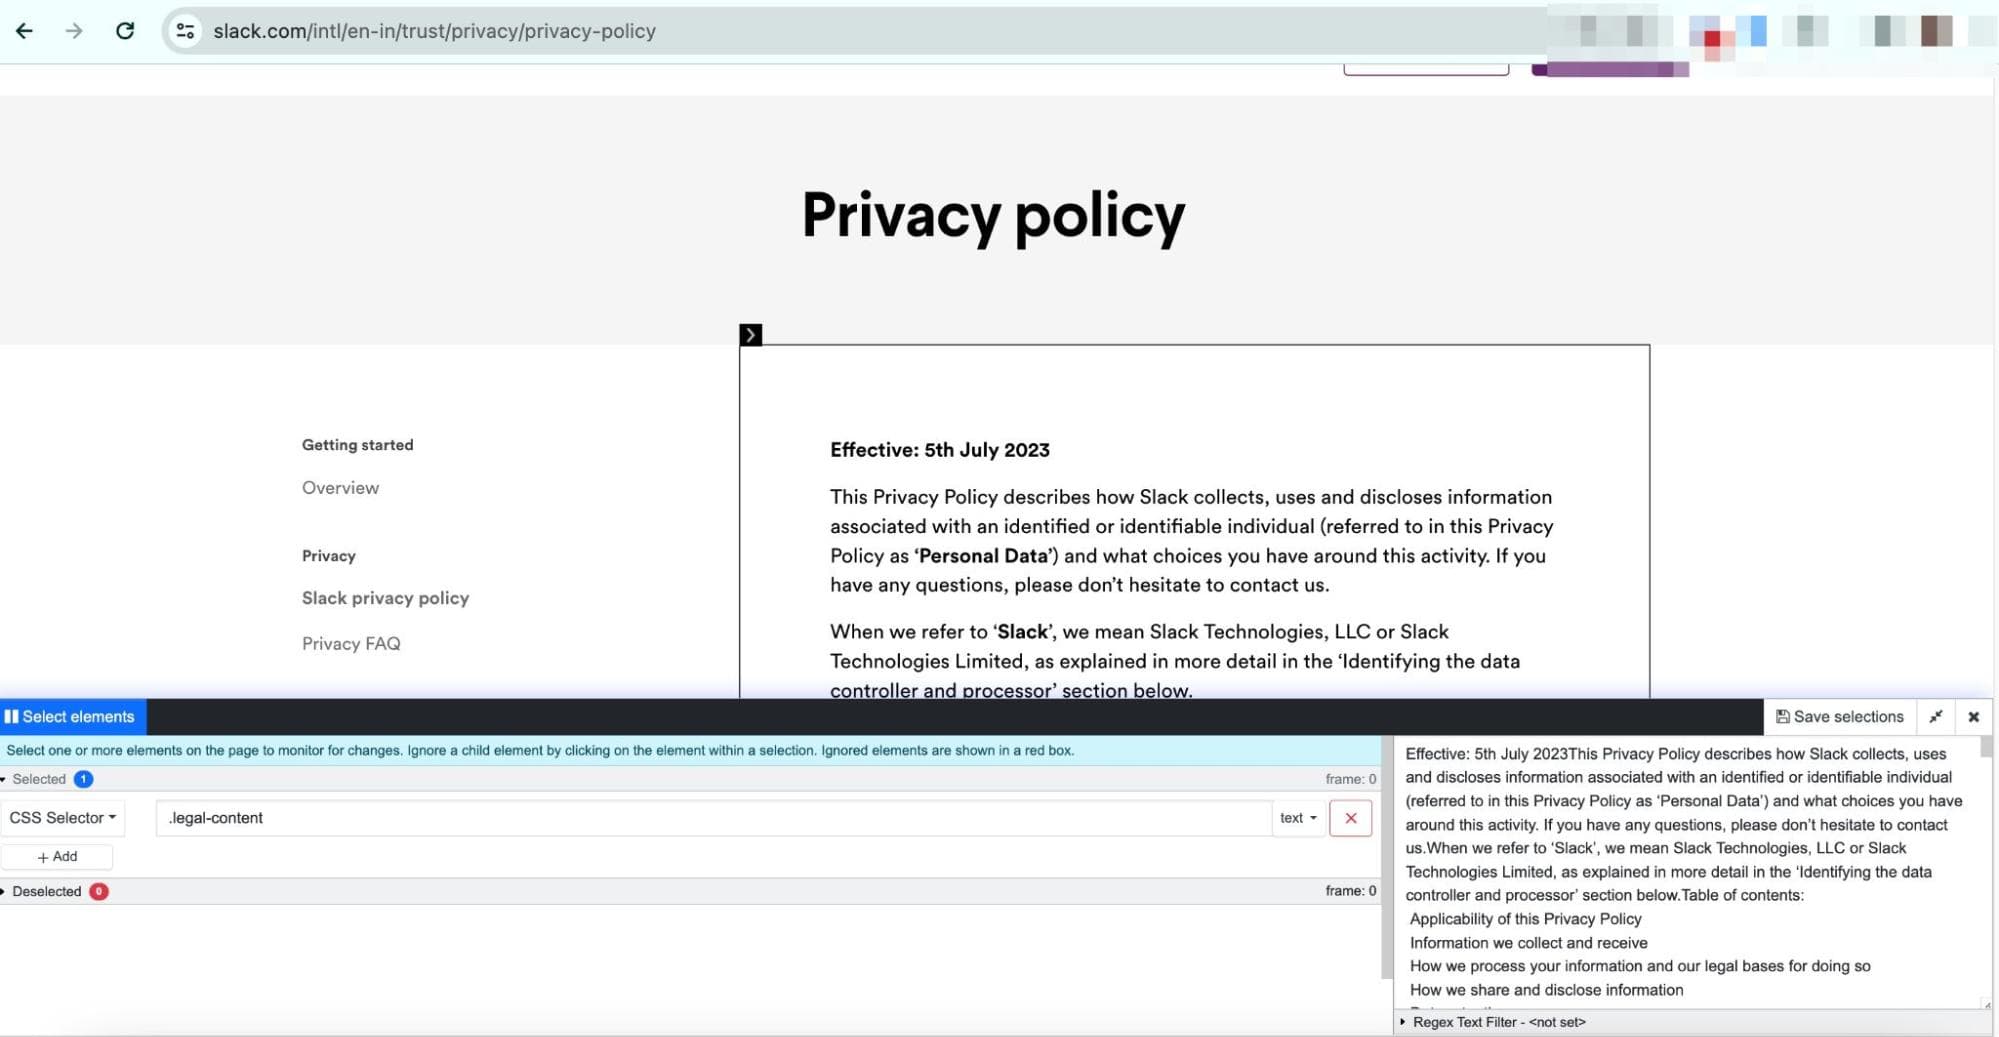 Tracking changes in the privacy policy 